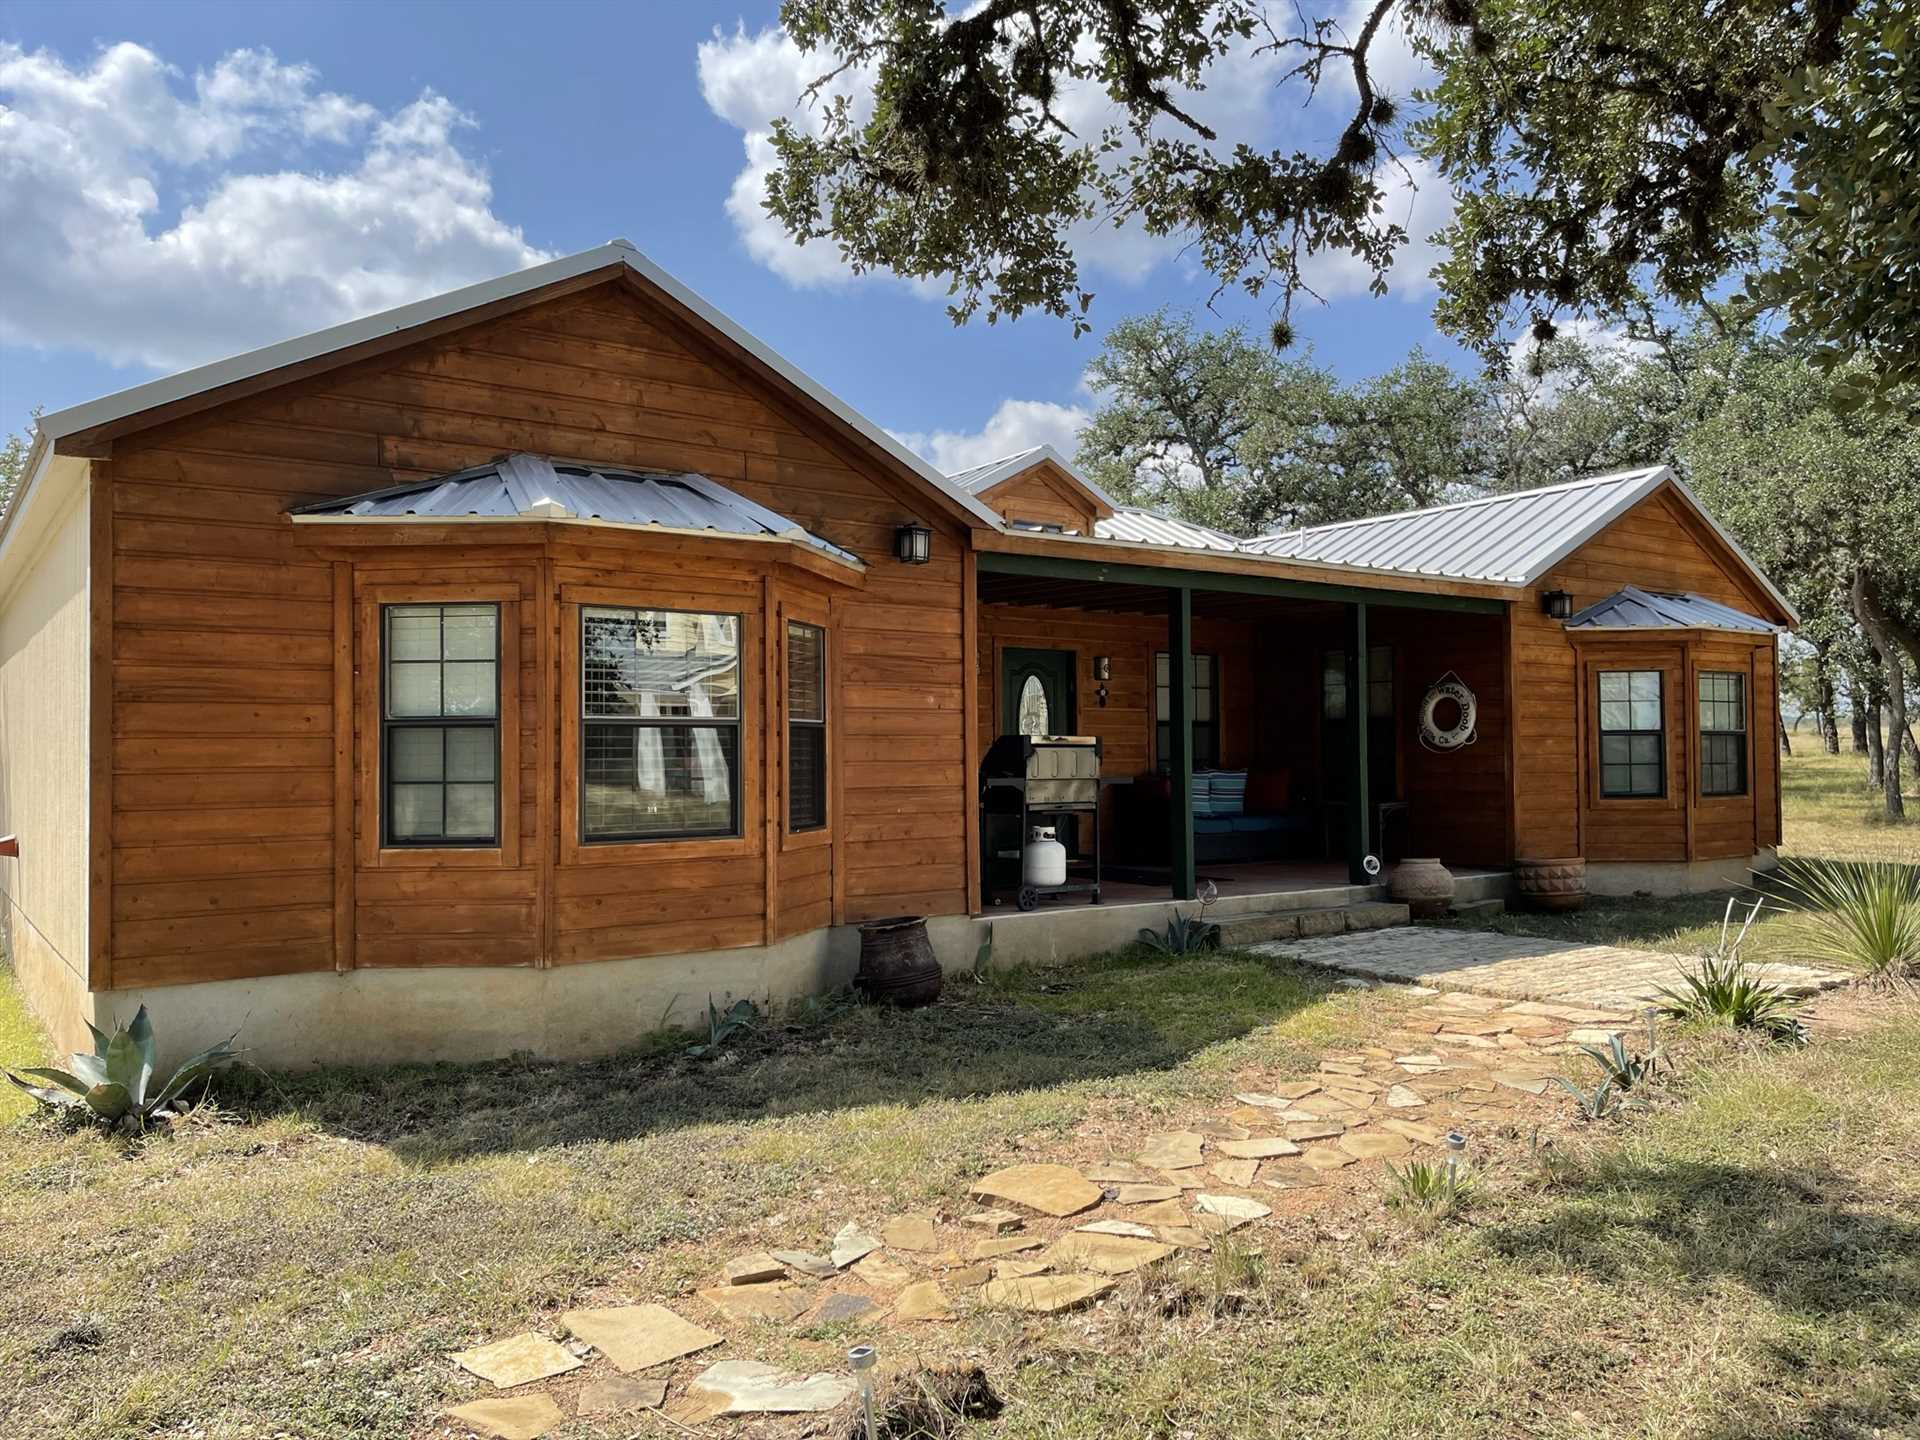                                                 Your portal to Hill Country beauty and well-earned relaxation: the Bandera Ridge Cabin!